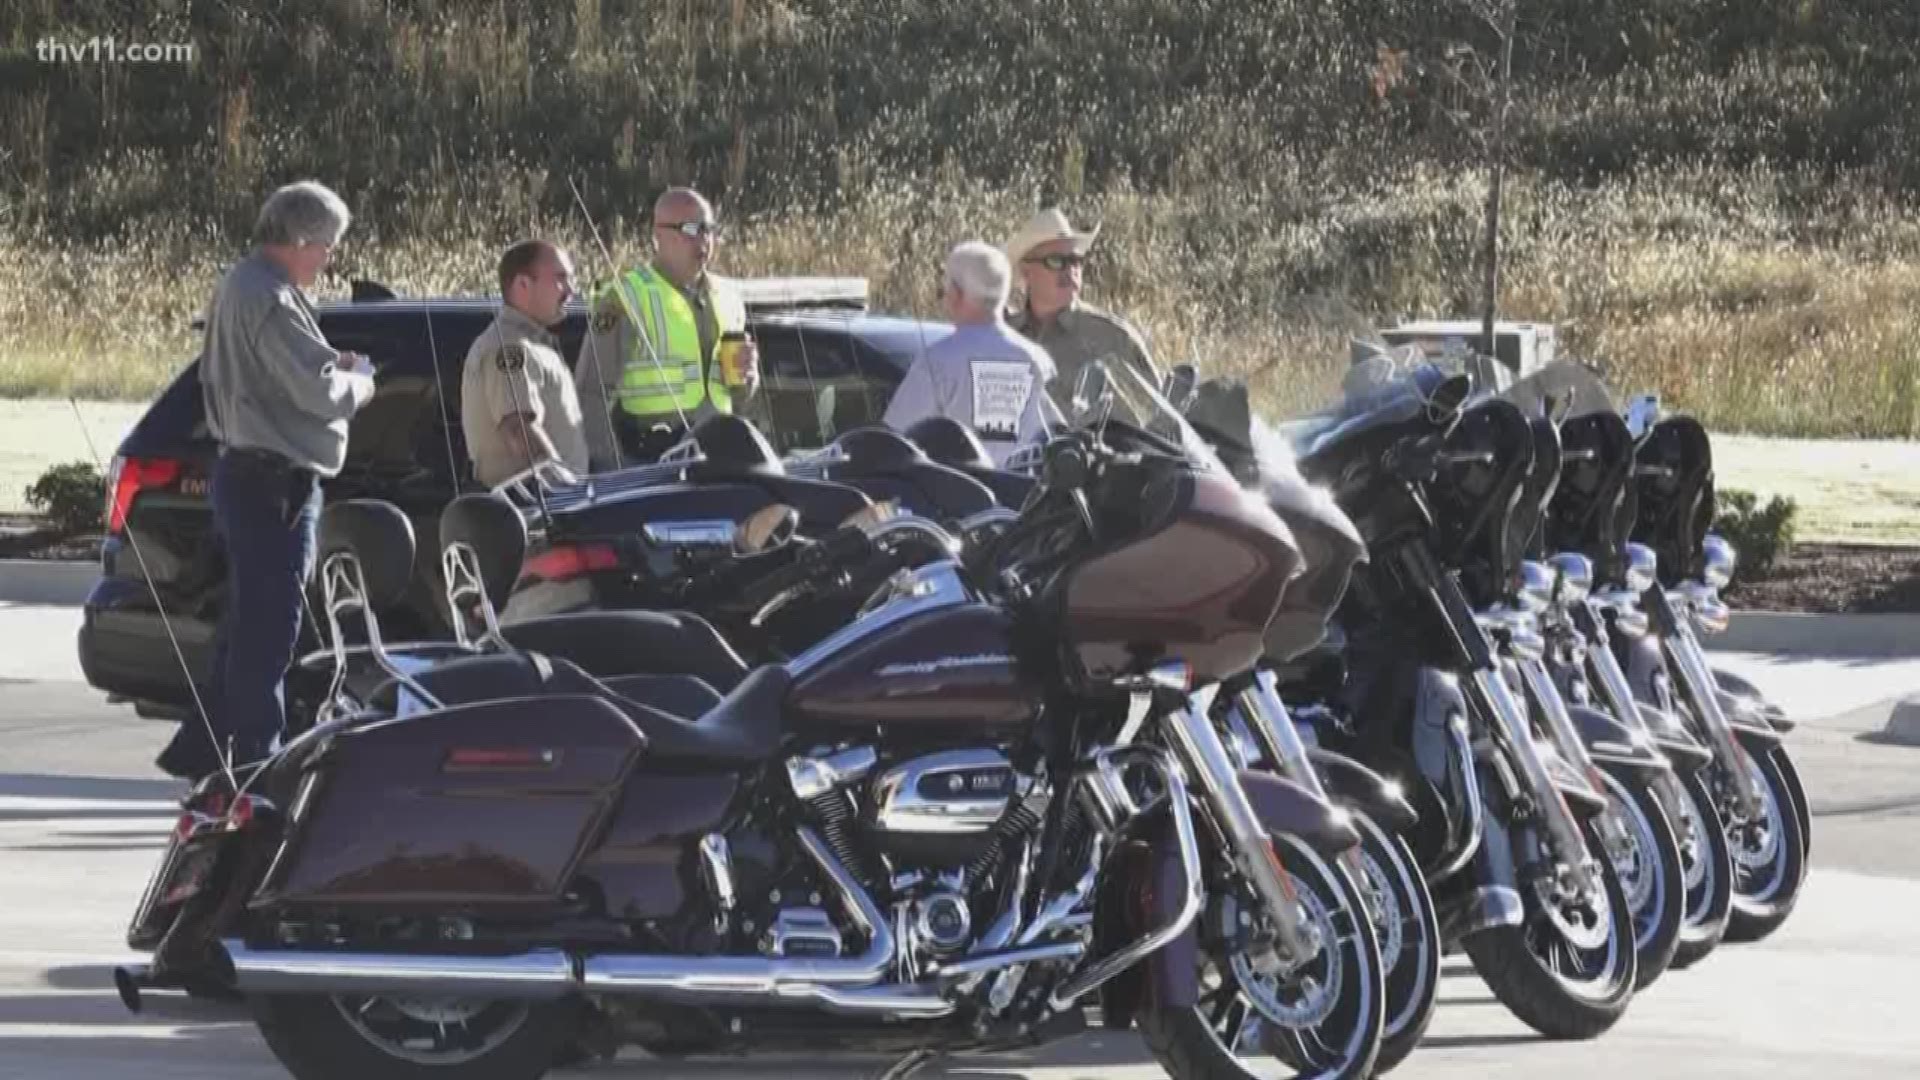 A group of motorcyclists rode to support local veterans today. Bikers gave donations to join the ride.